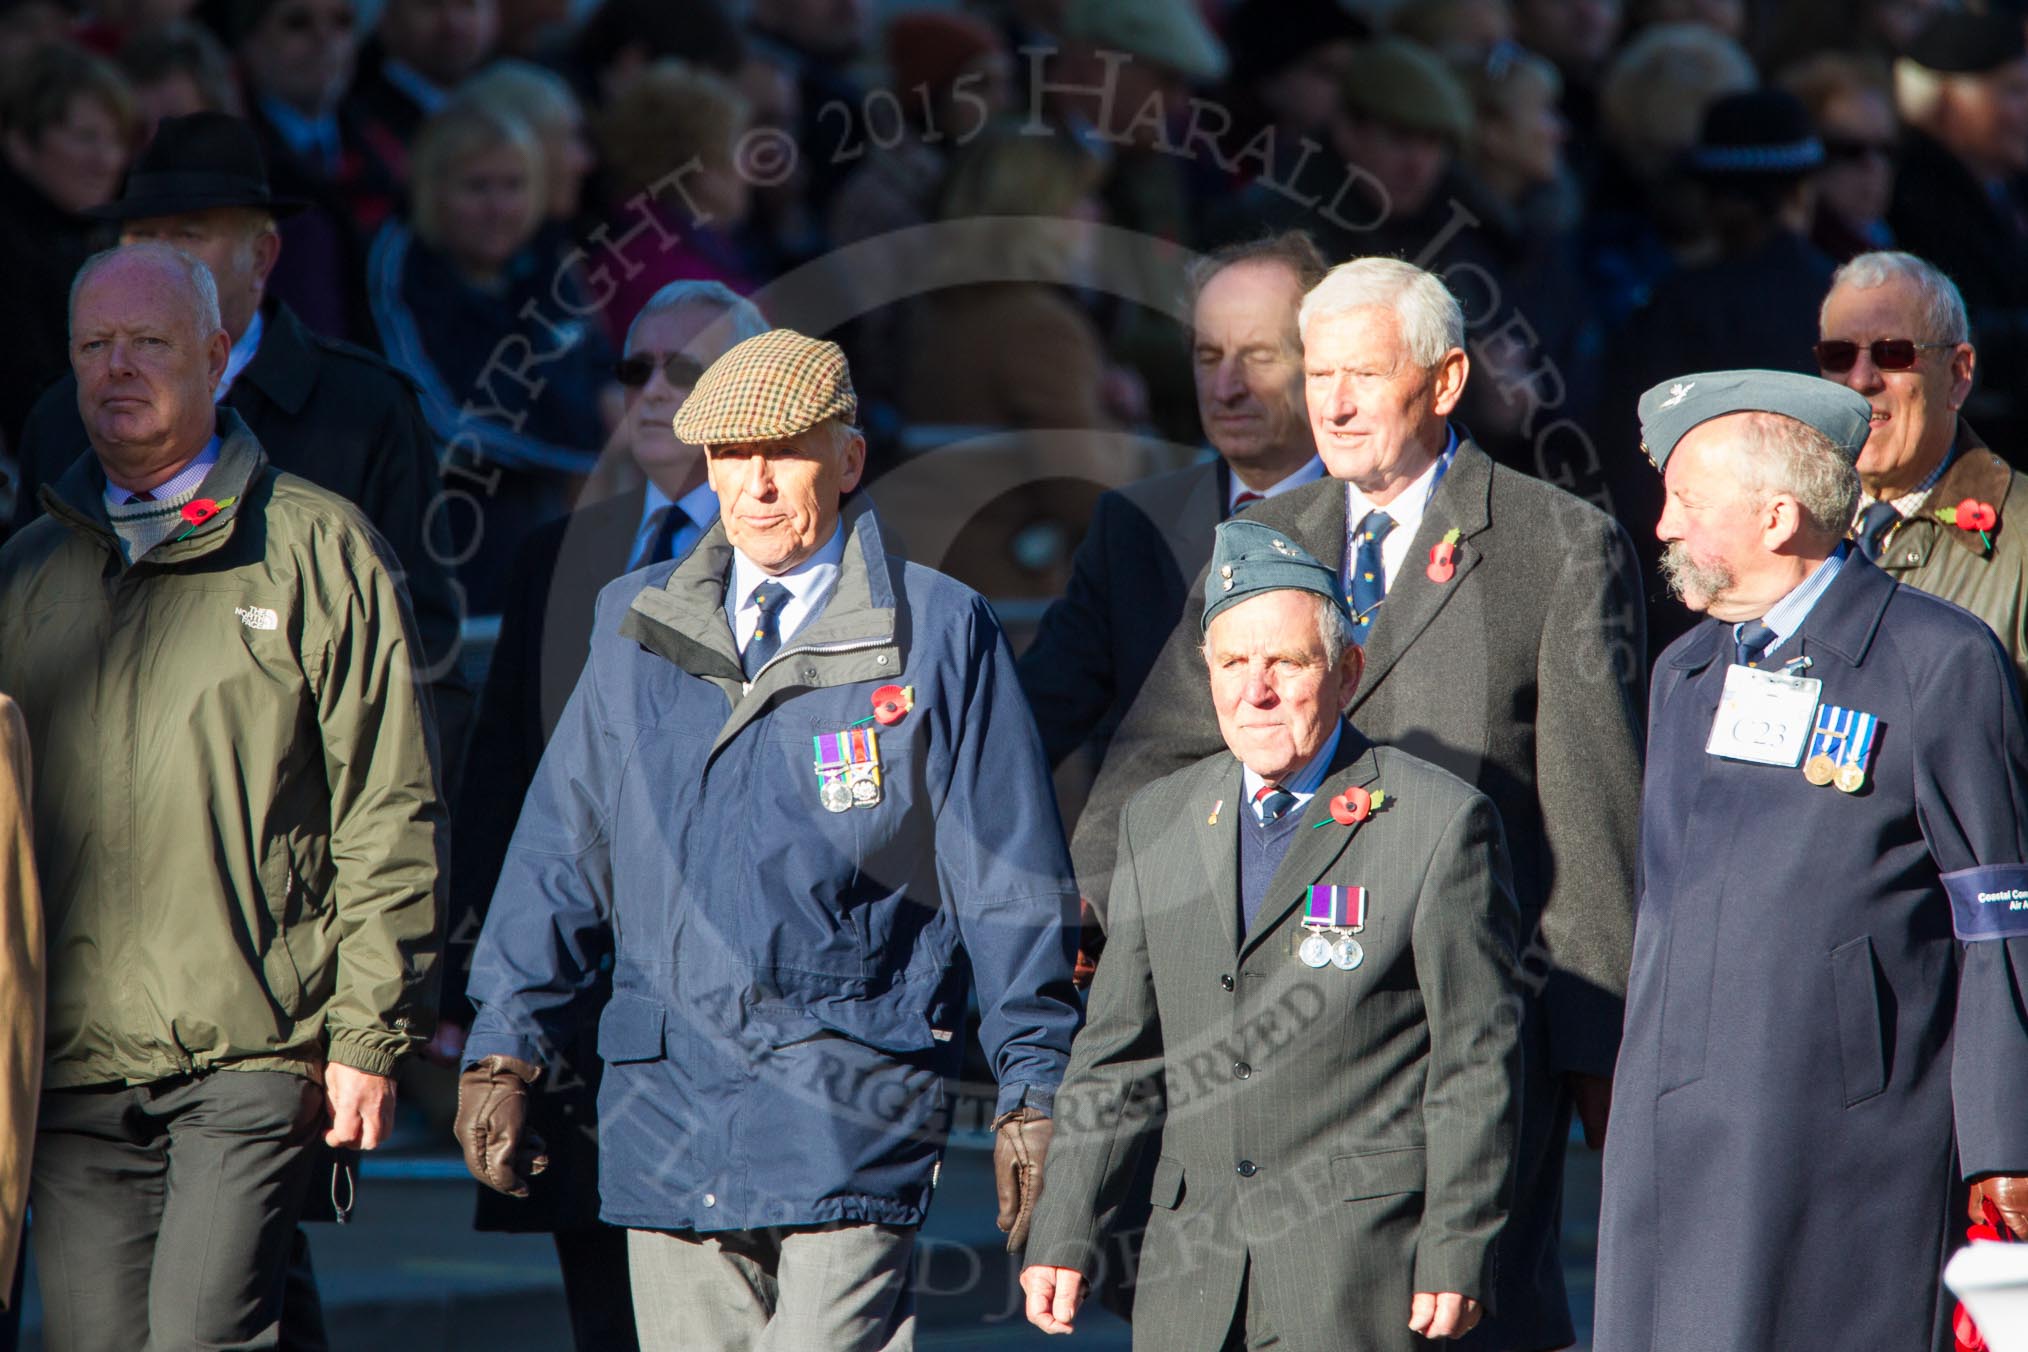 Remembrance Sunday Cenotaph March Past 2013: C23 - Coastal Command & Maritime Air Association..
Press stand opposite the Foreign Office building, Whitehall, London SW1,
London,
Greater London,
United Kingdom,
on 10 November 2013 at 12:08, image #1838